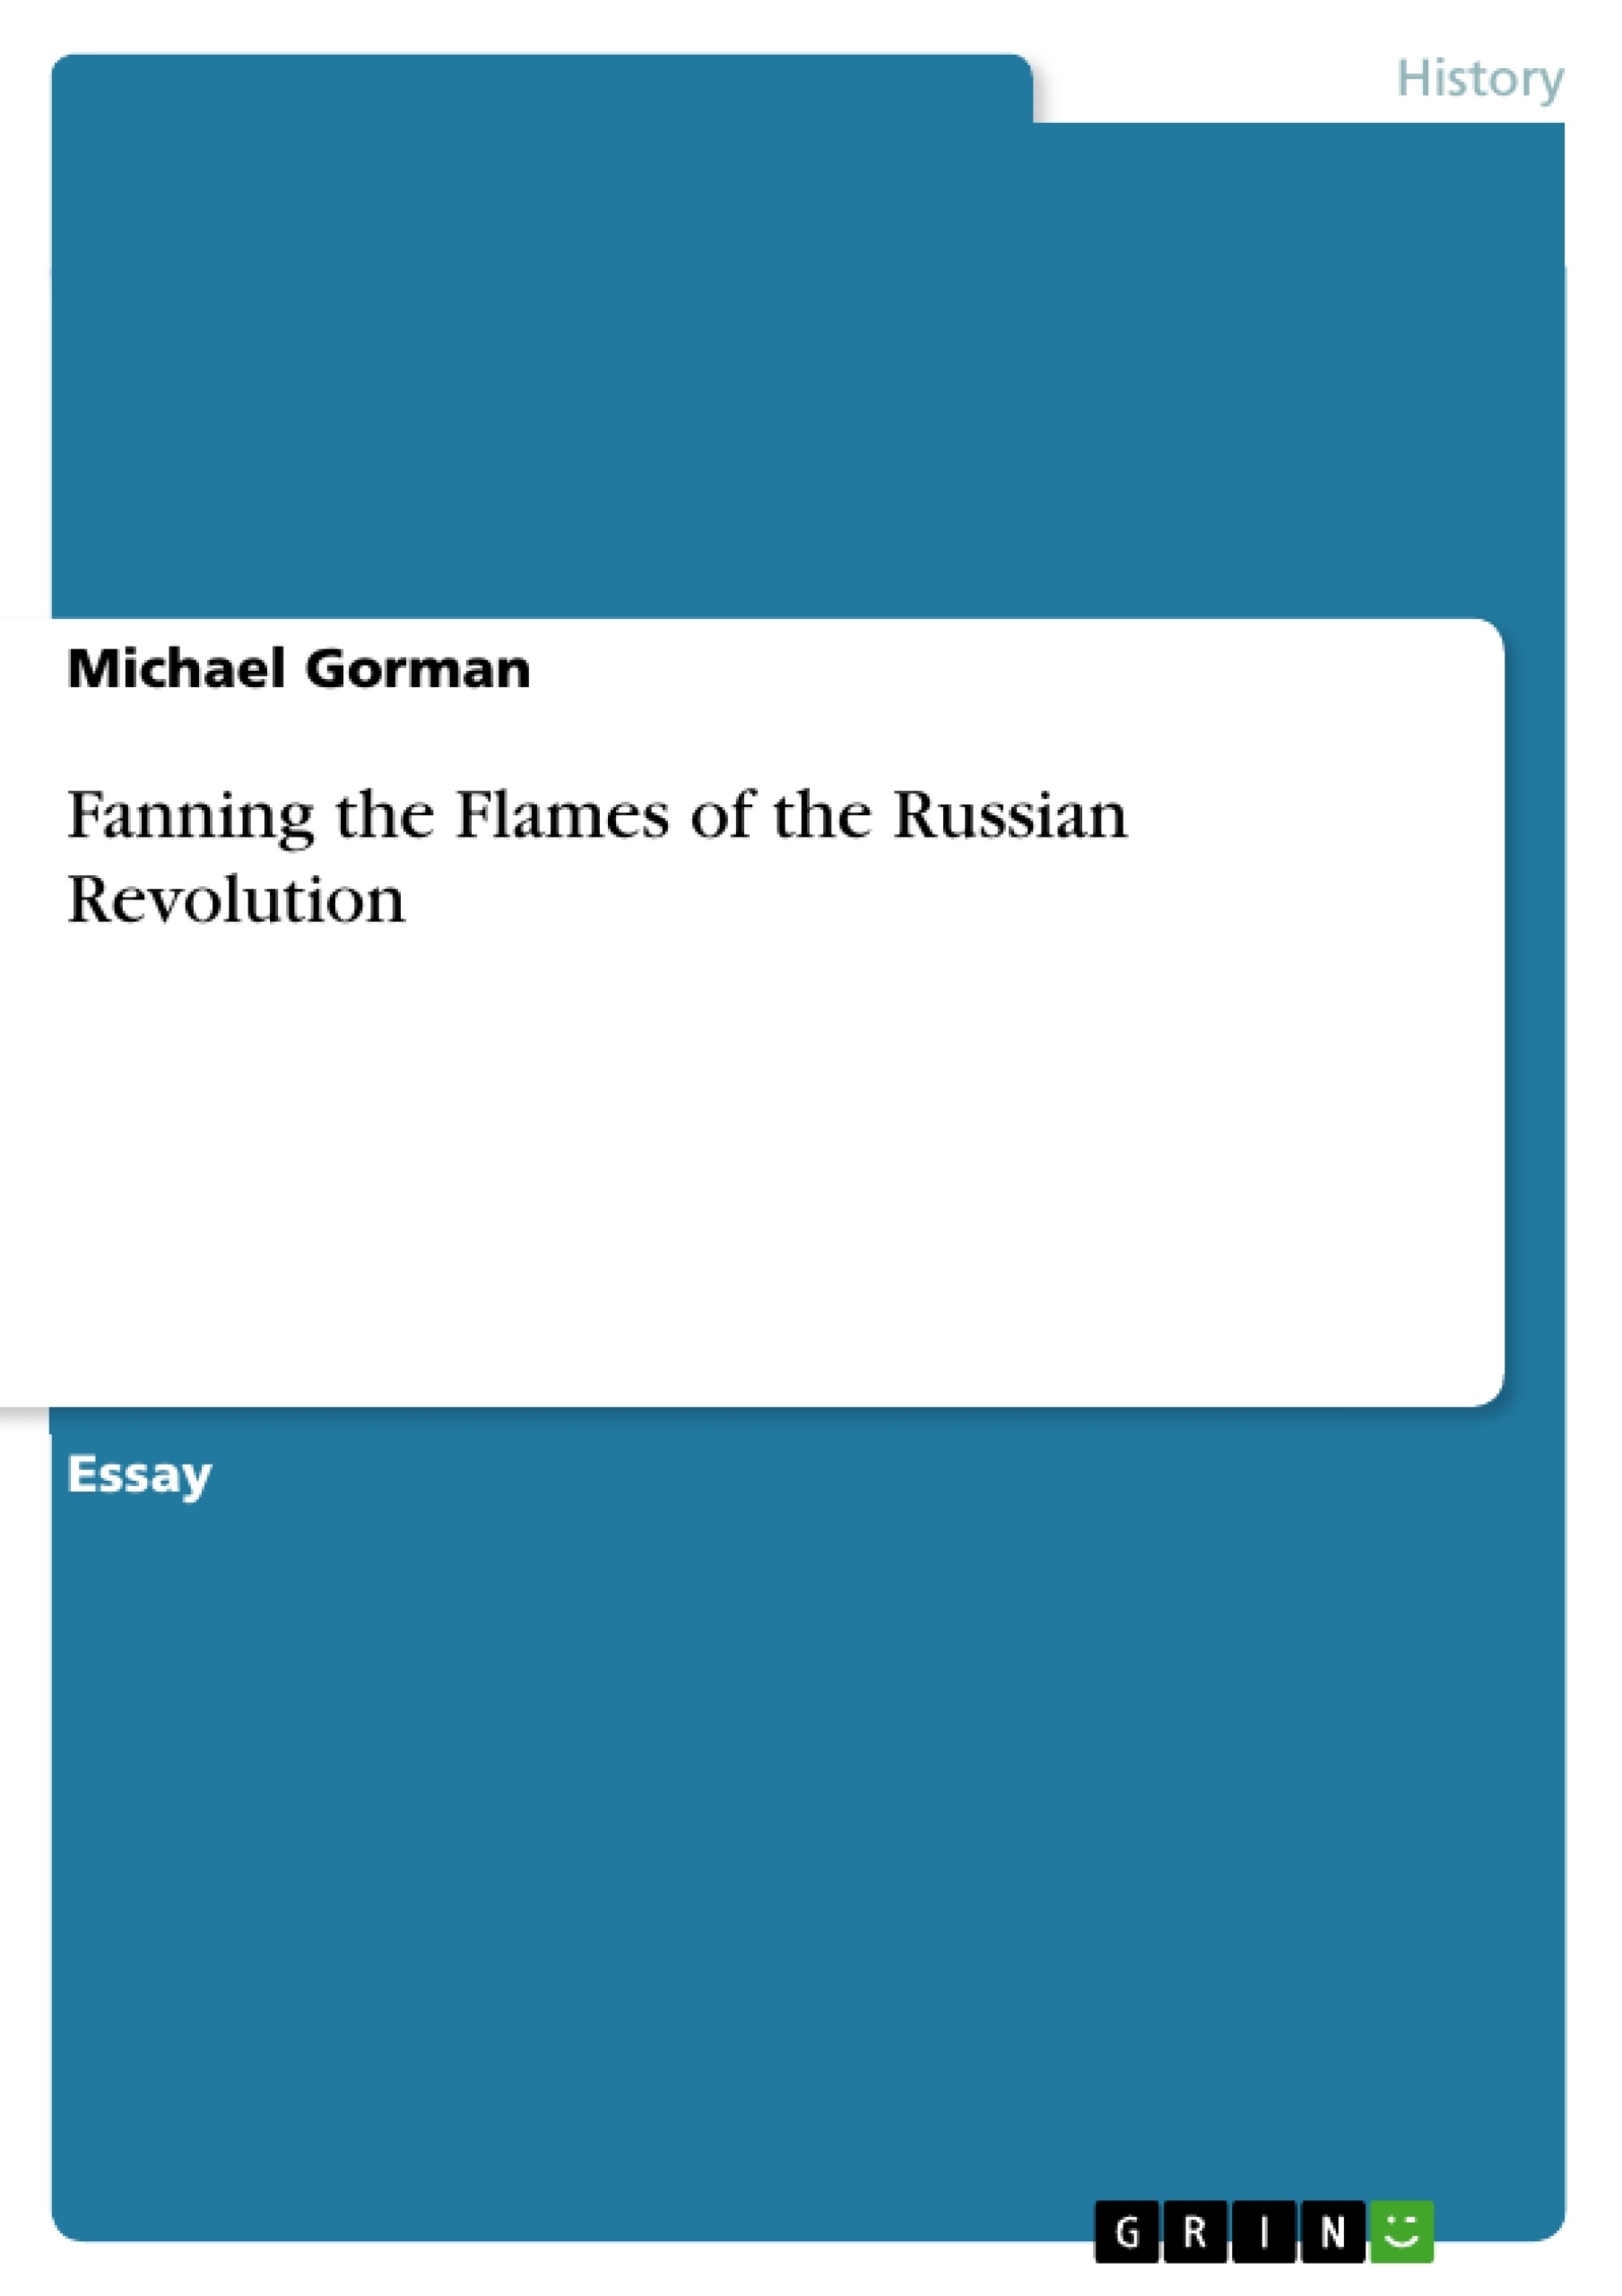 Titre: Fanning the Flames of the Russian Revolution